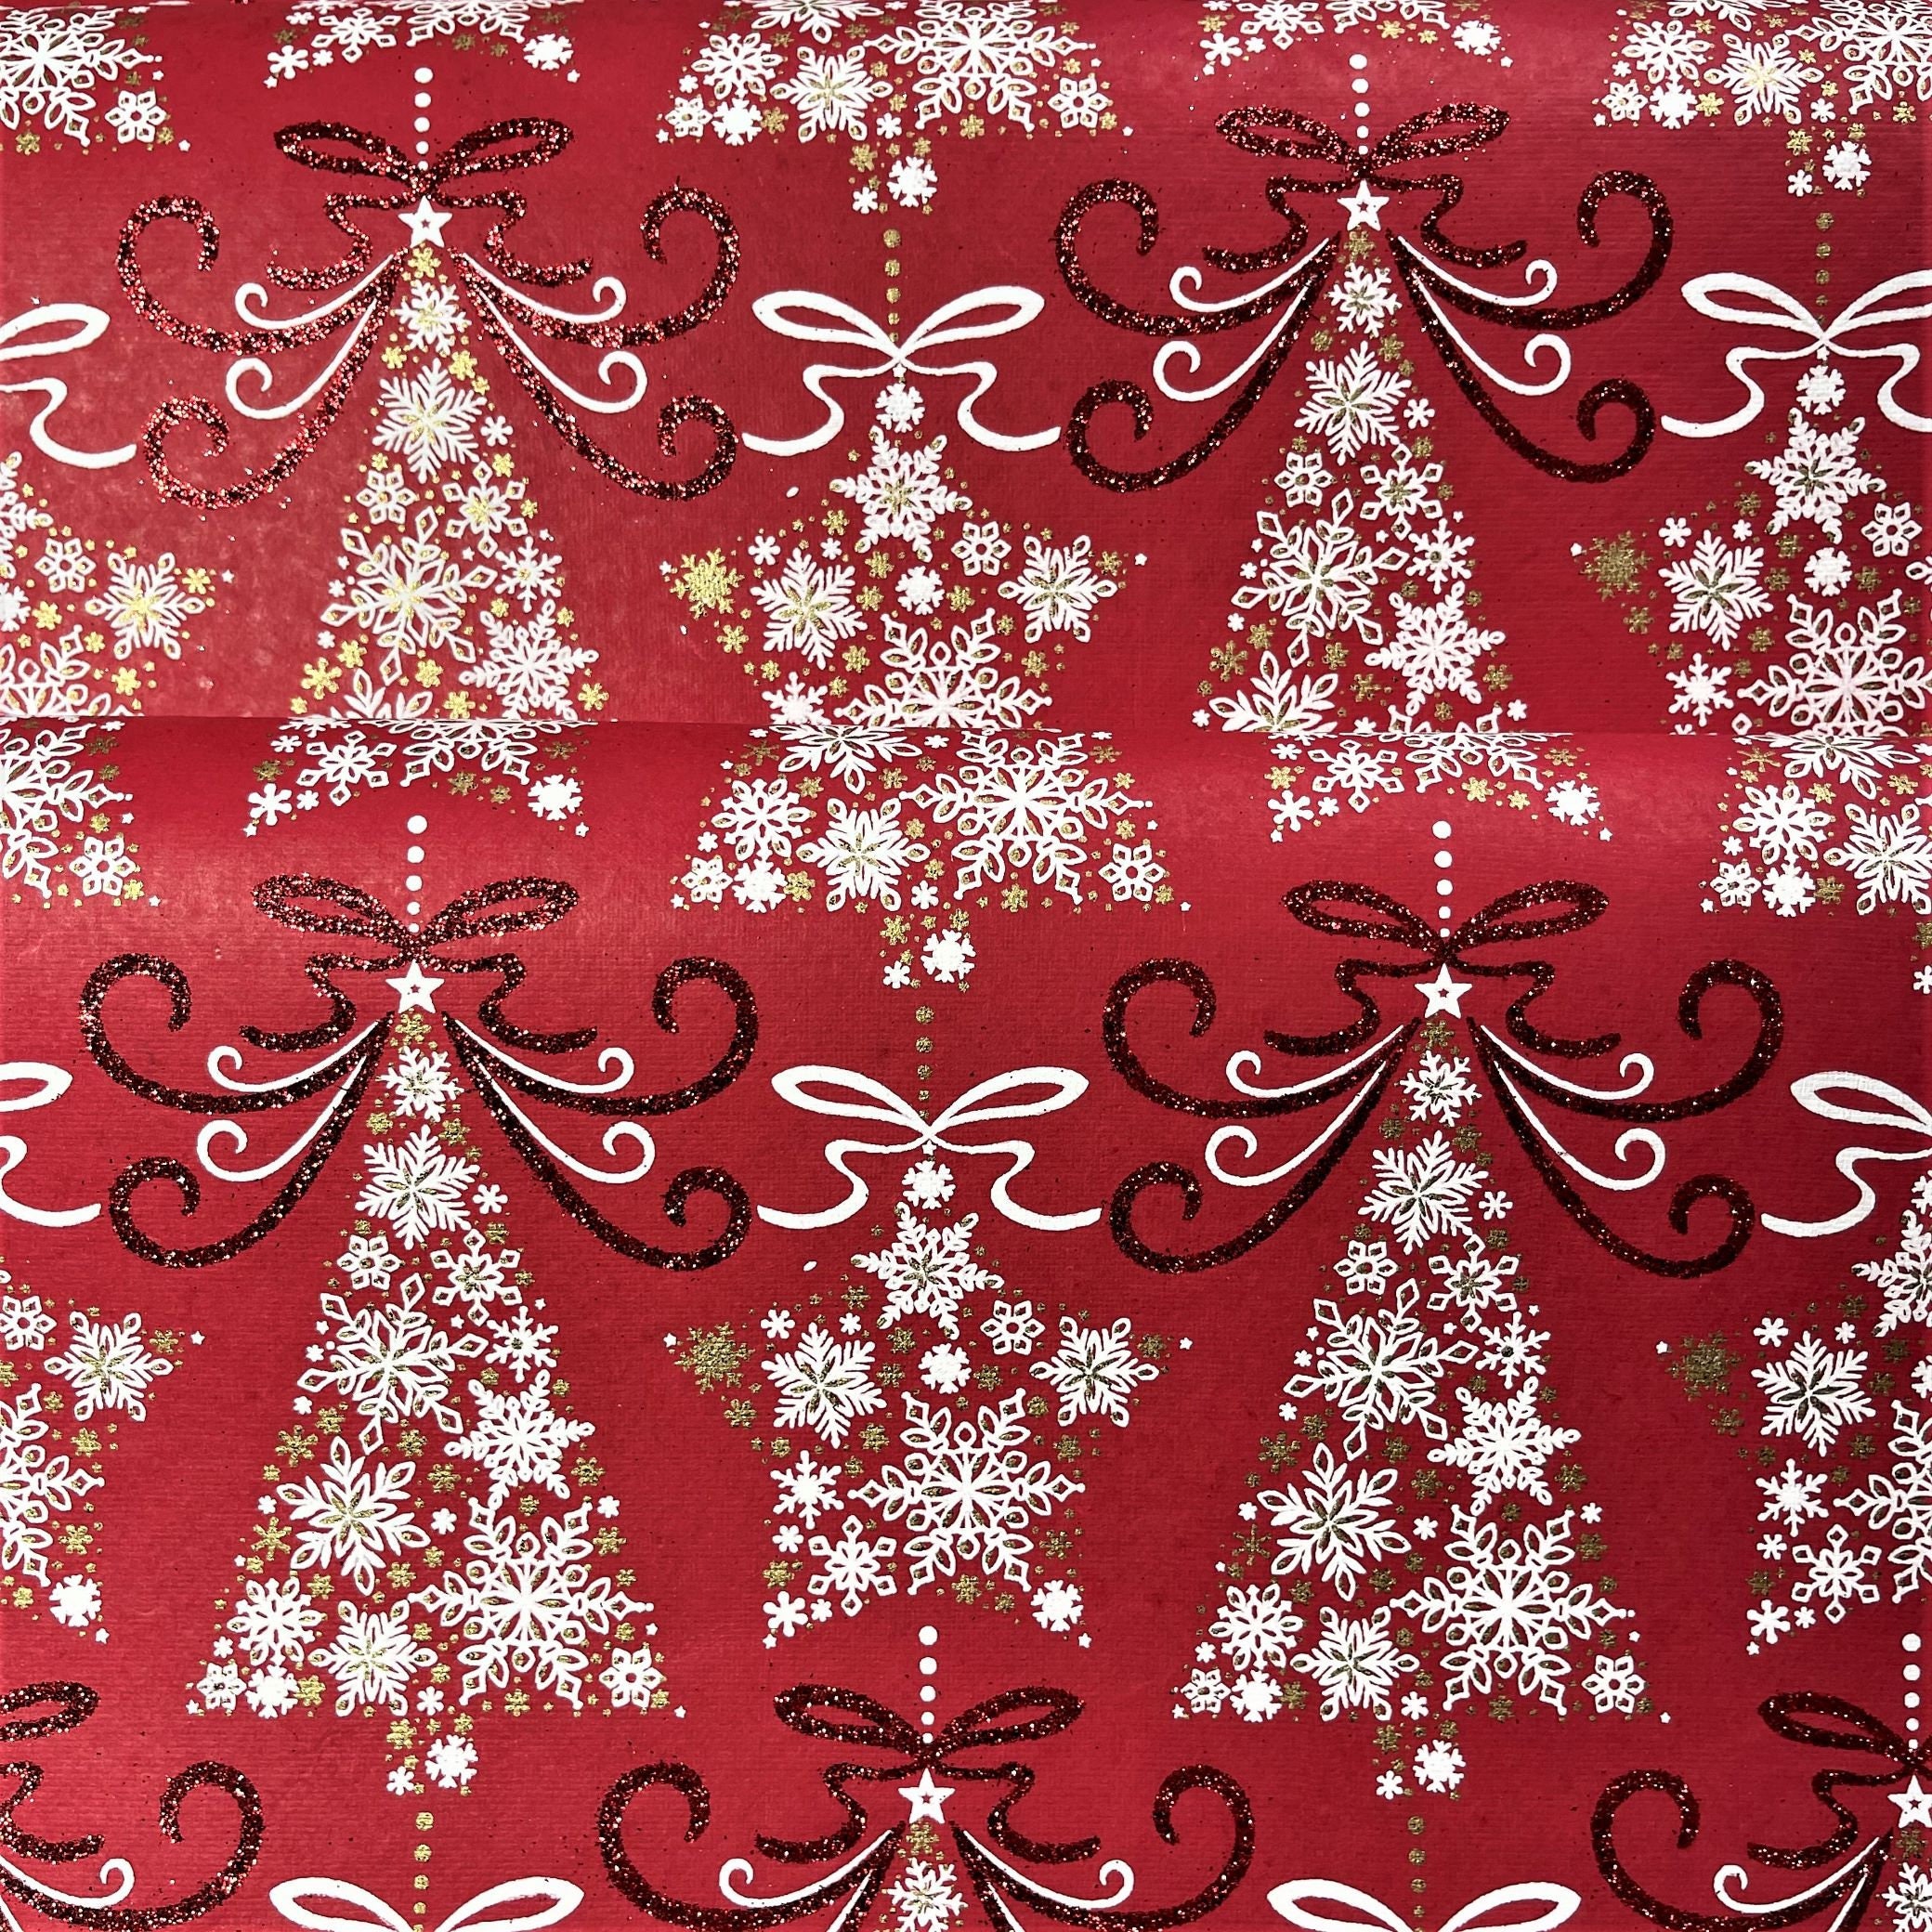 Handmade Gift Wrapping Paper Sheets 700mm X 500mm Paisley Pattern